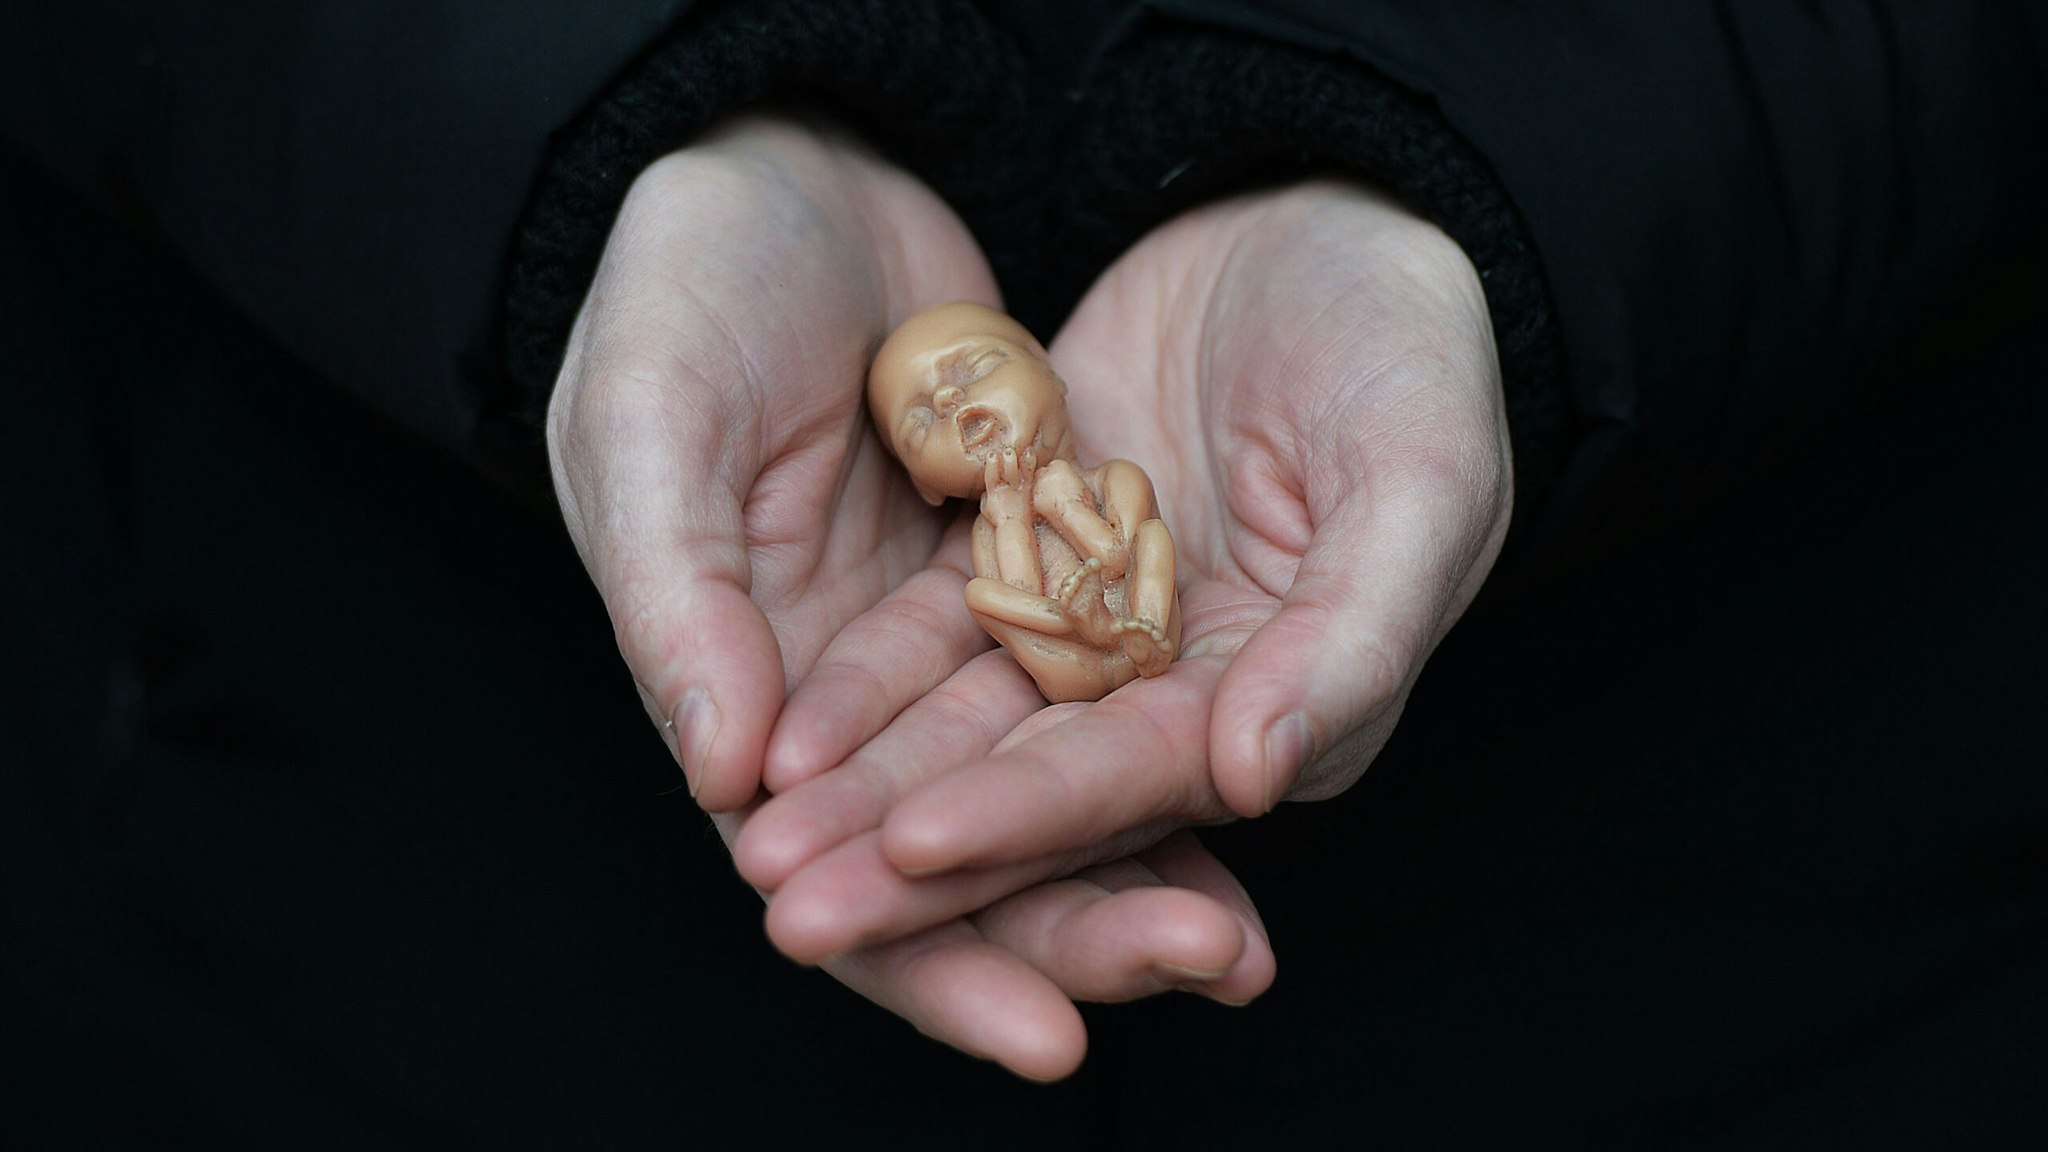 A Pro Life campaigner displays a plastic doll representing a 12 week old foetus as she stands outside the Marie Stopes Clinic on April 7, 2016 in Belfast, Northern Ireland.